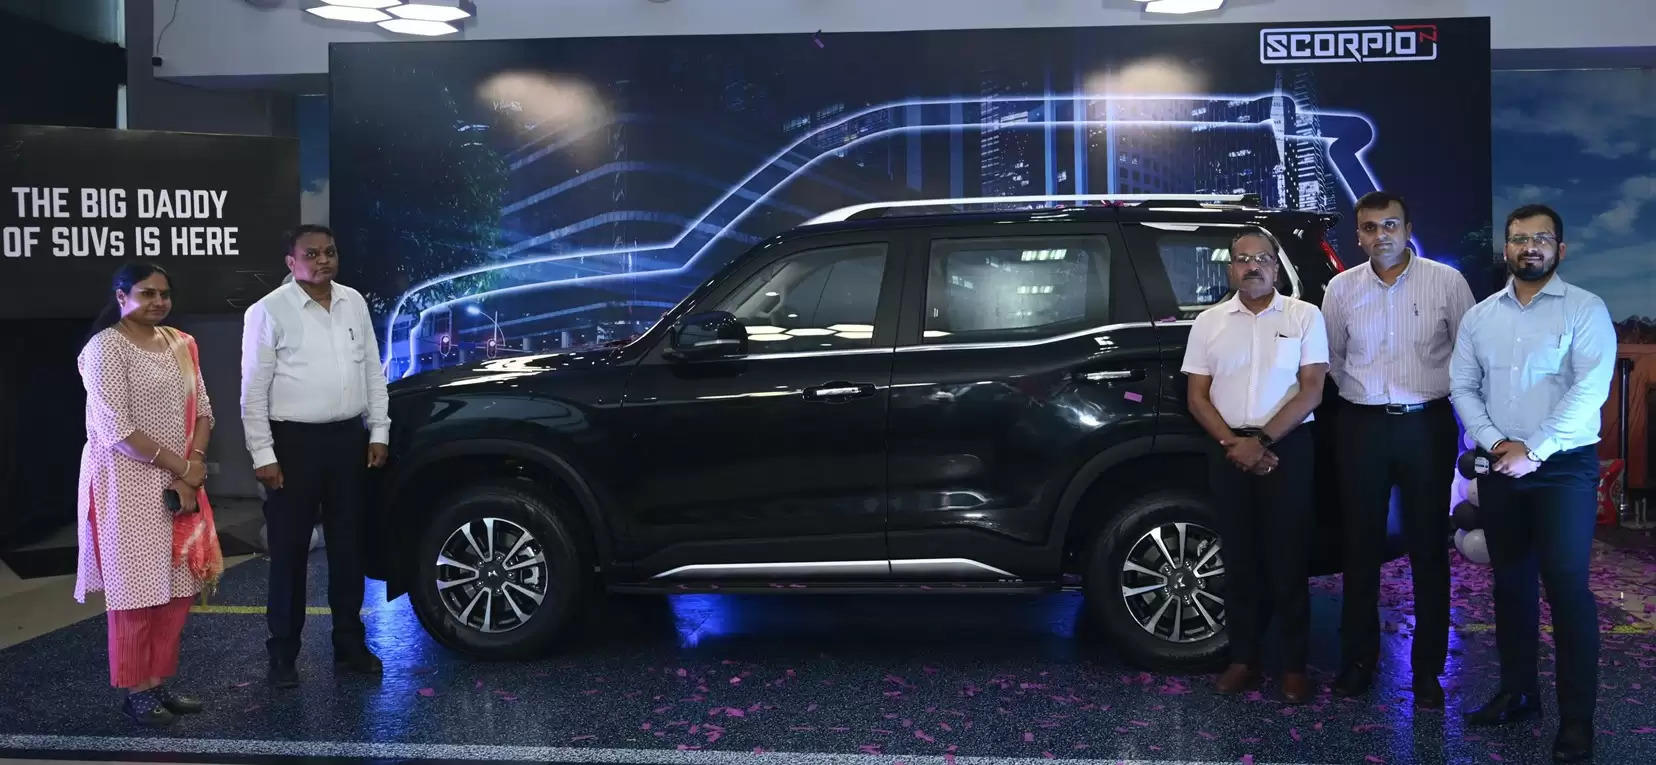 New Mahindra Scorpio Launched at Udaipur, KS Mahindra launches The Big Daddy of SUVs in Udaipur